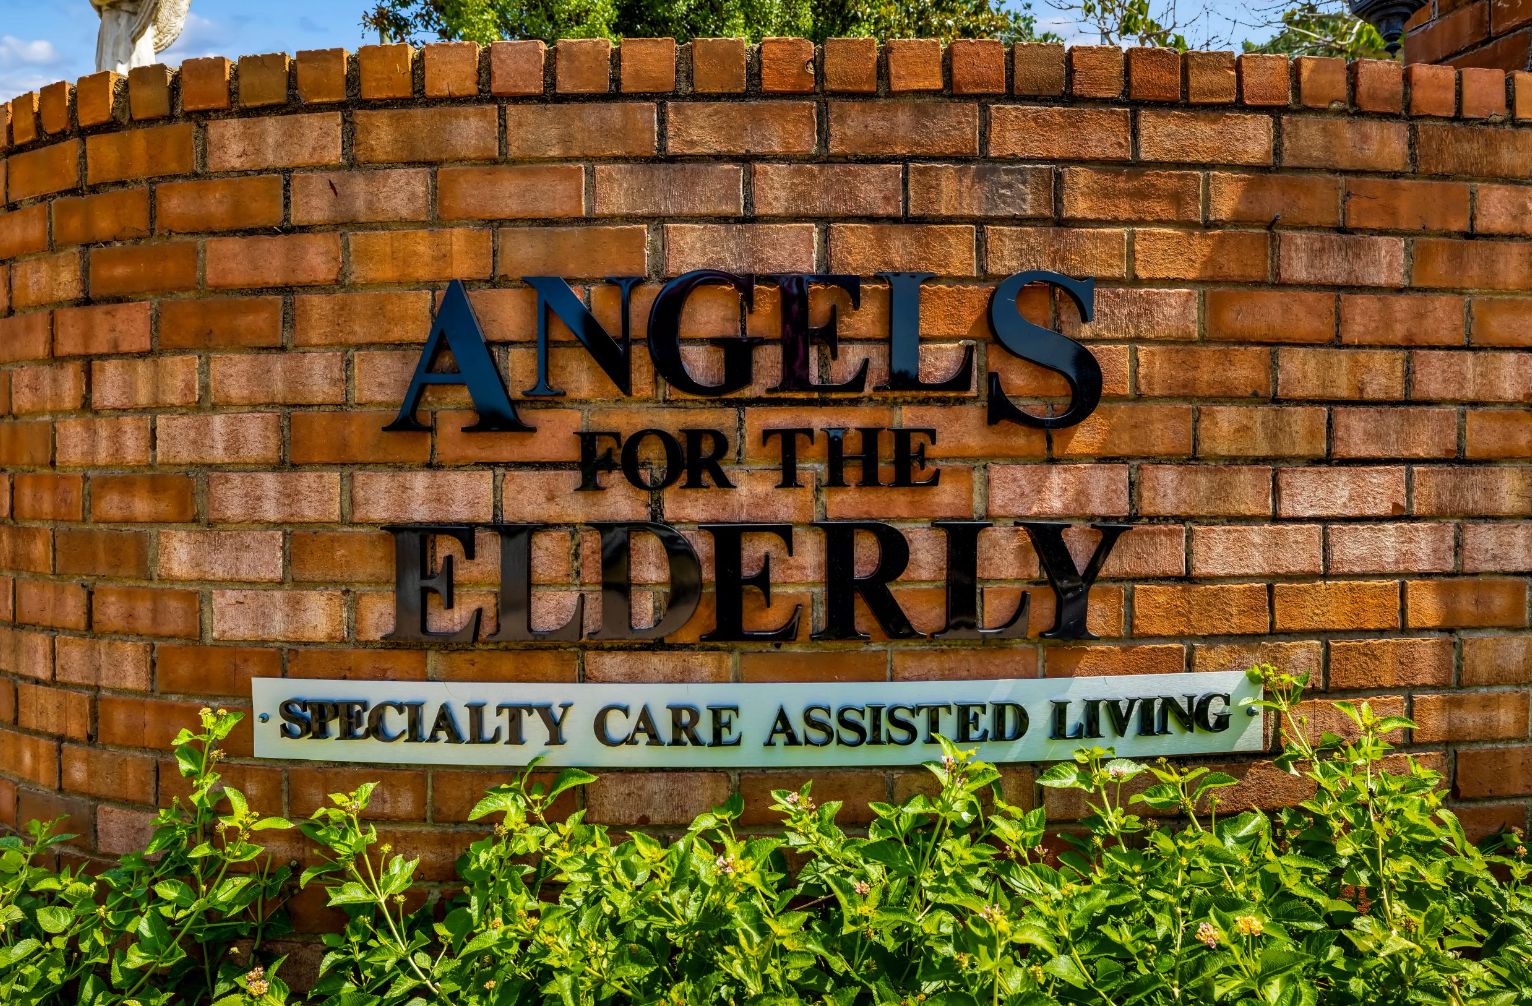 Angels for the Elderly (CLOSED) 4